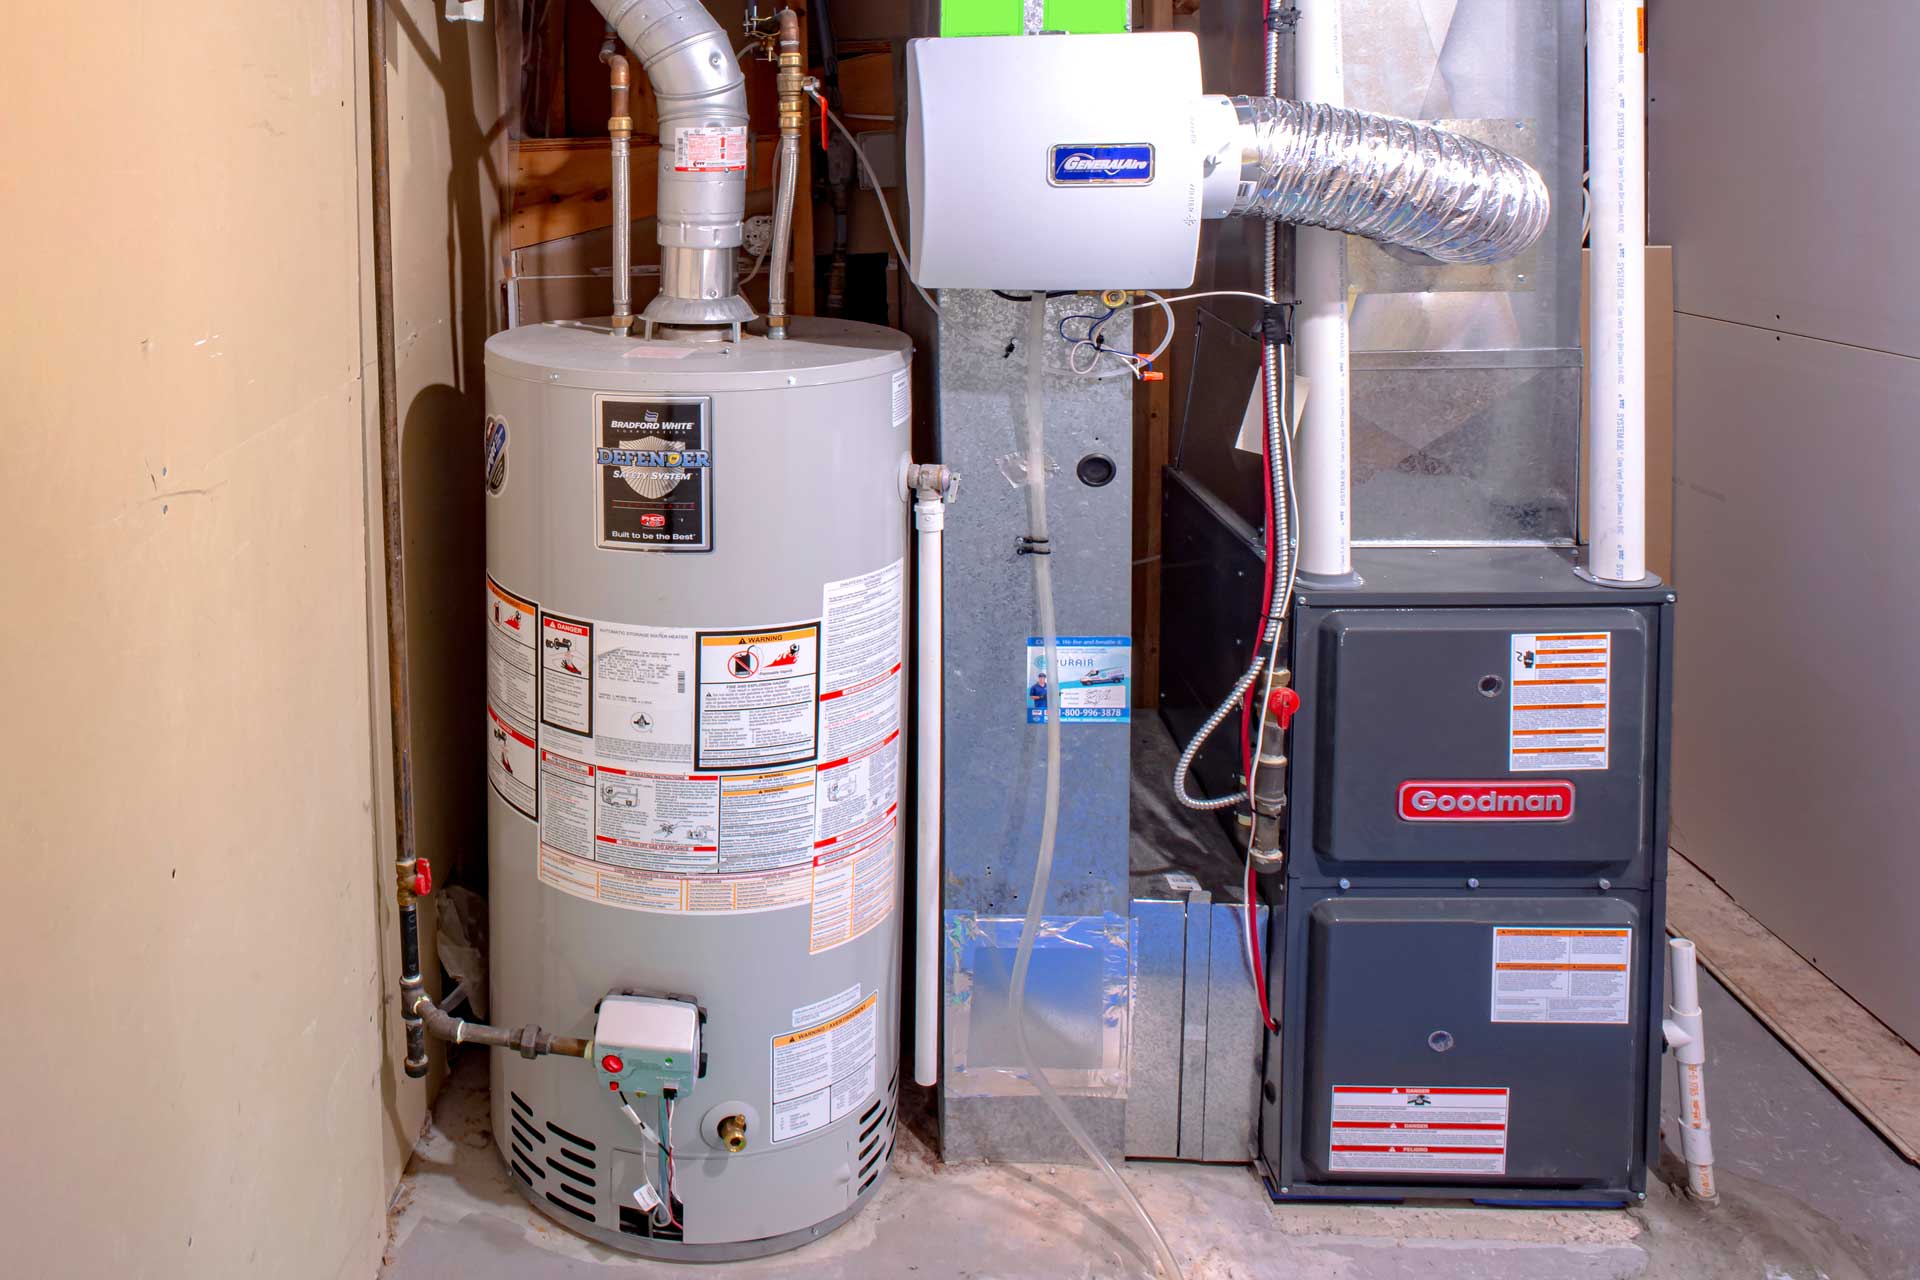 Understanding Water Heaters and Hot Water Shortages